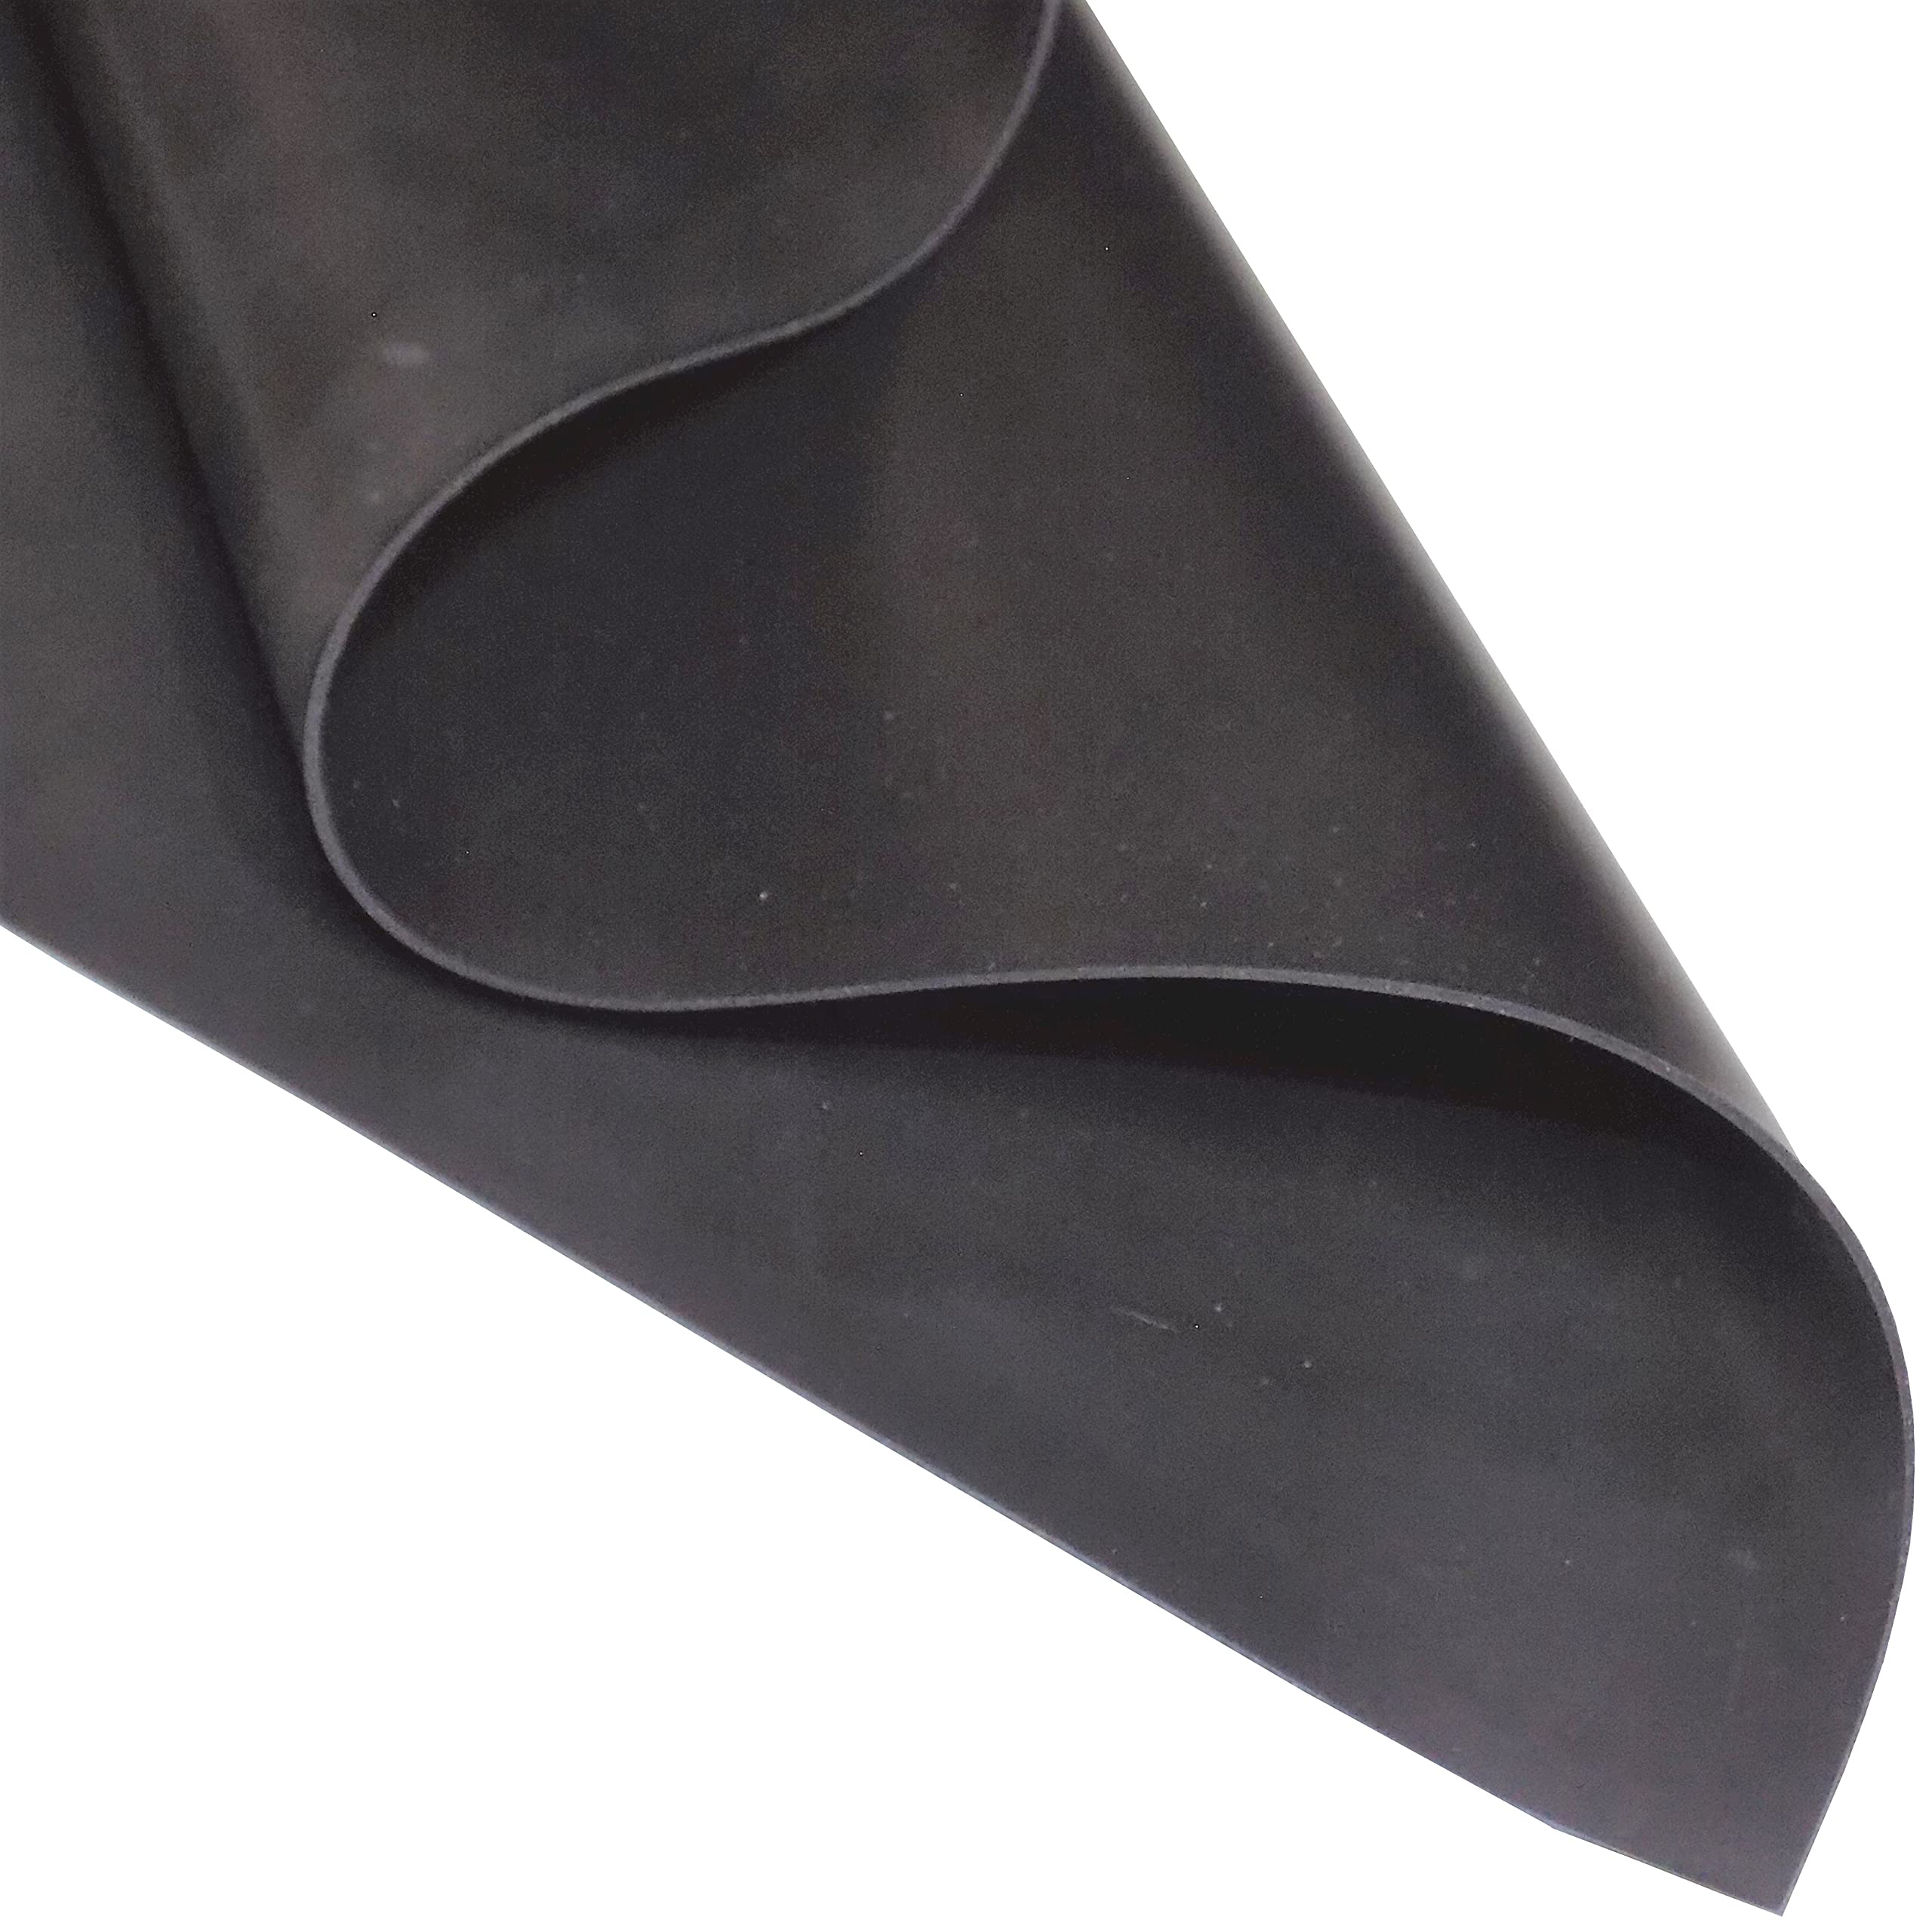 Exactly Rubber Neoprene Sheet - 132 X 9A X 12A 60A Durometer, Made In The Usa